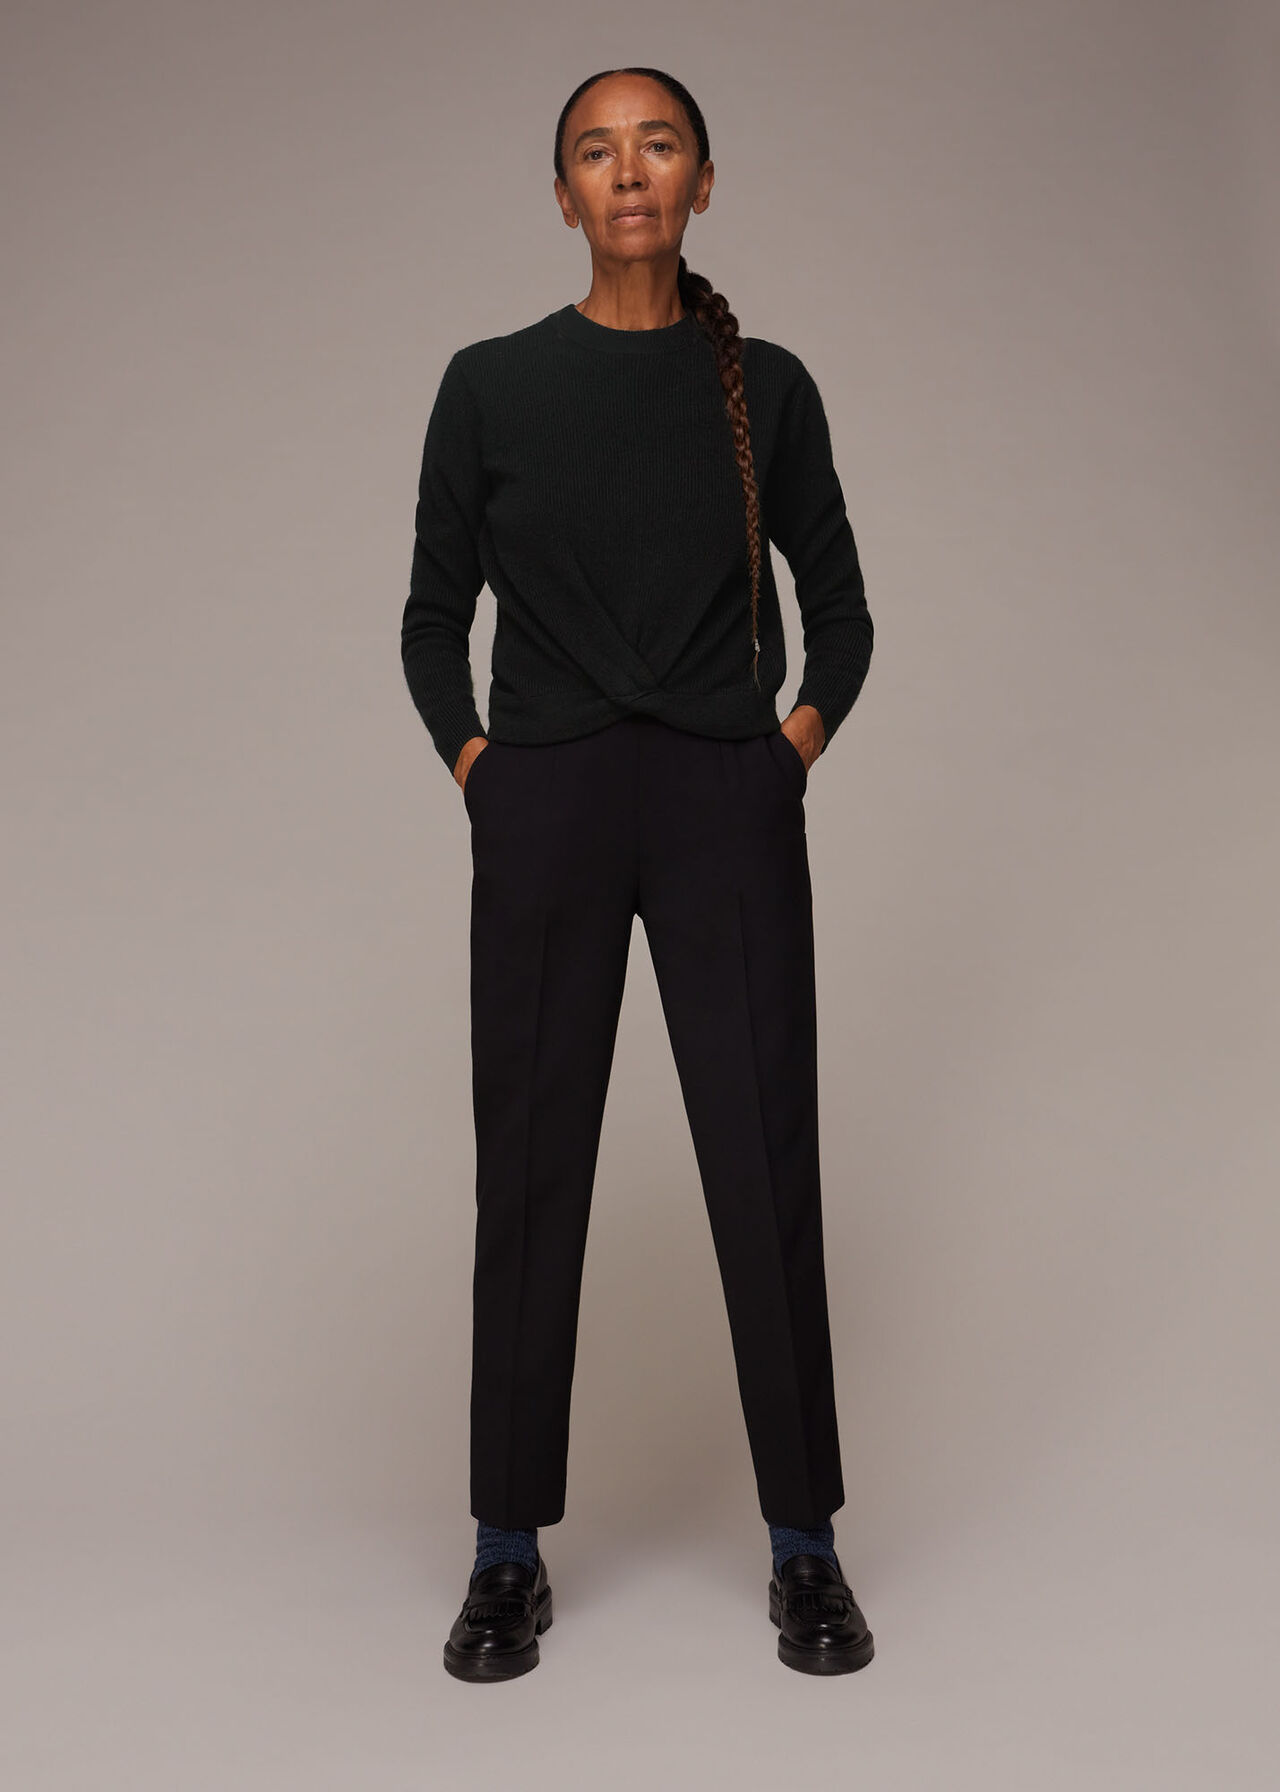 Black Twist Front Wool Cashmere Knit | WHISTLES | Whistles UK